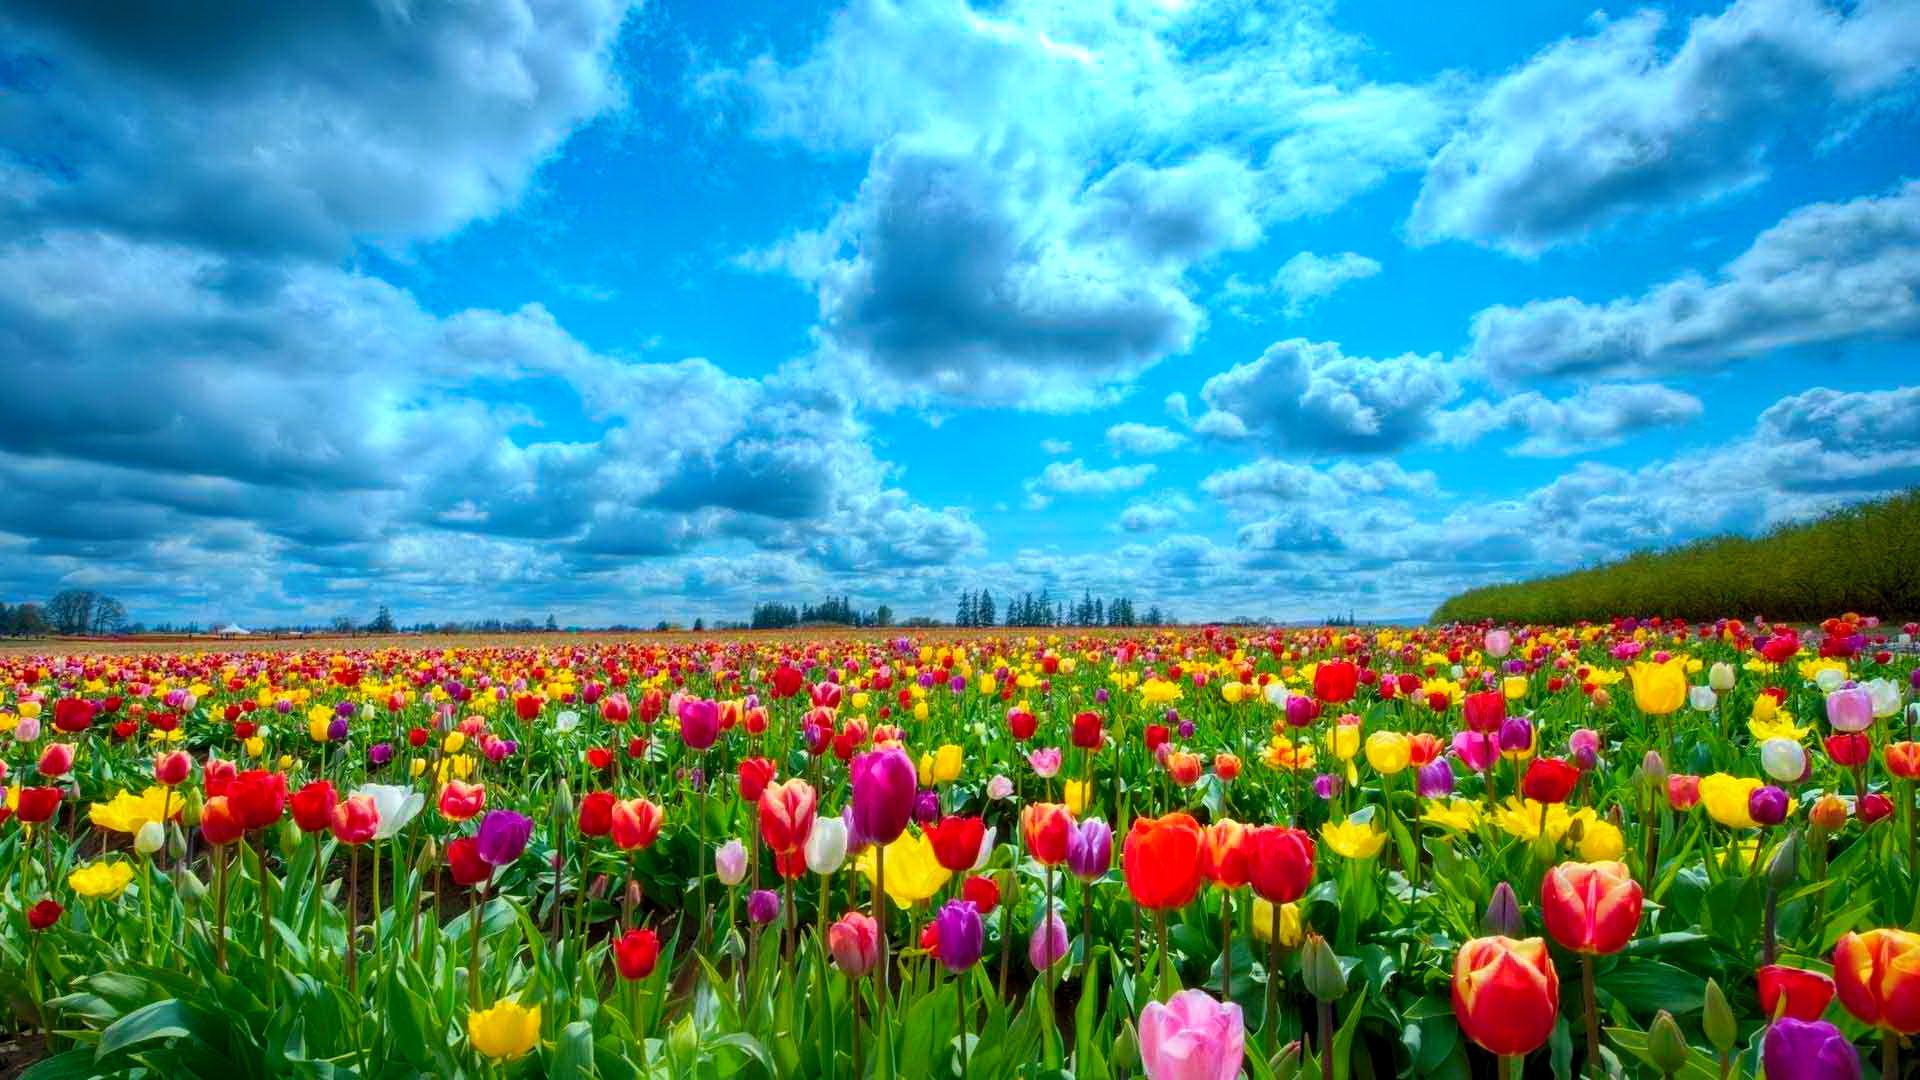 Love this photo! Such beautiful colors of spring tulips! When we get